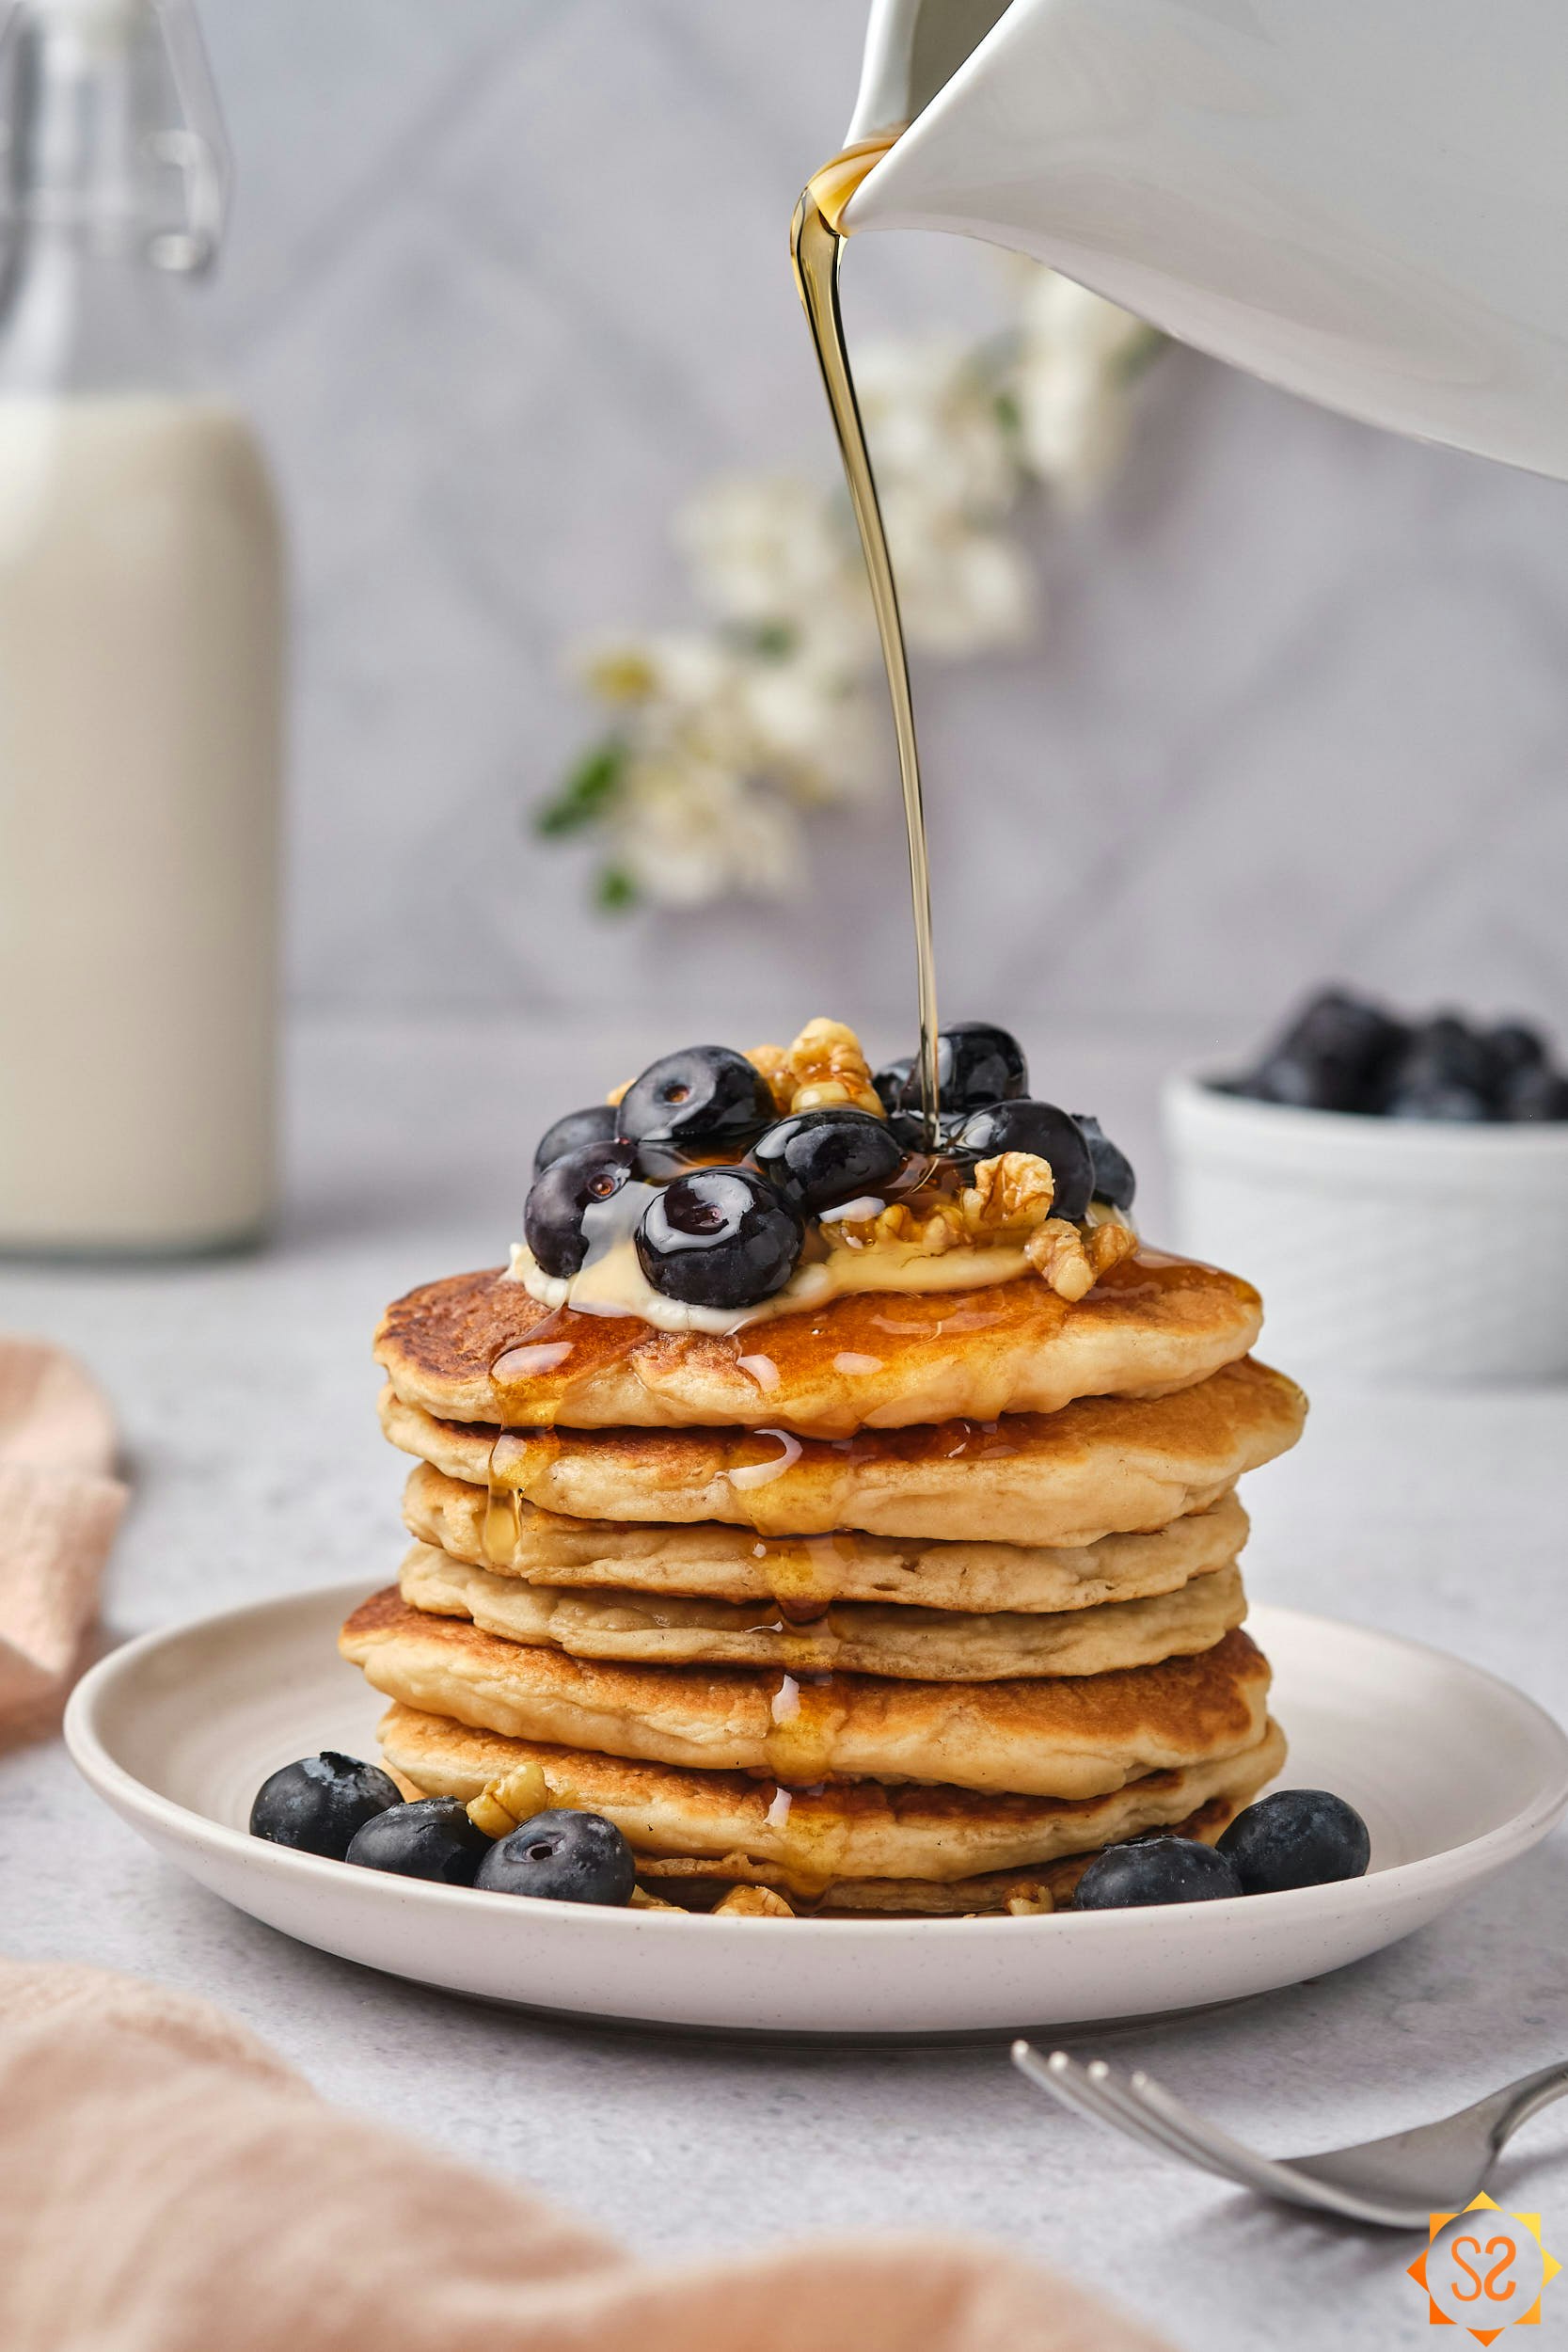 A wide view of a stack of vegan protein pancakes, with maple syrup being poured from a small pitcher above.